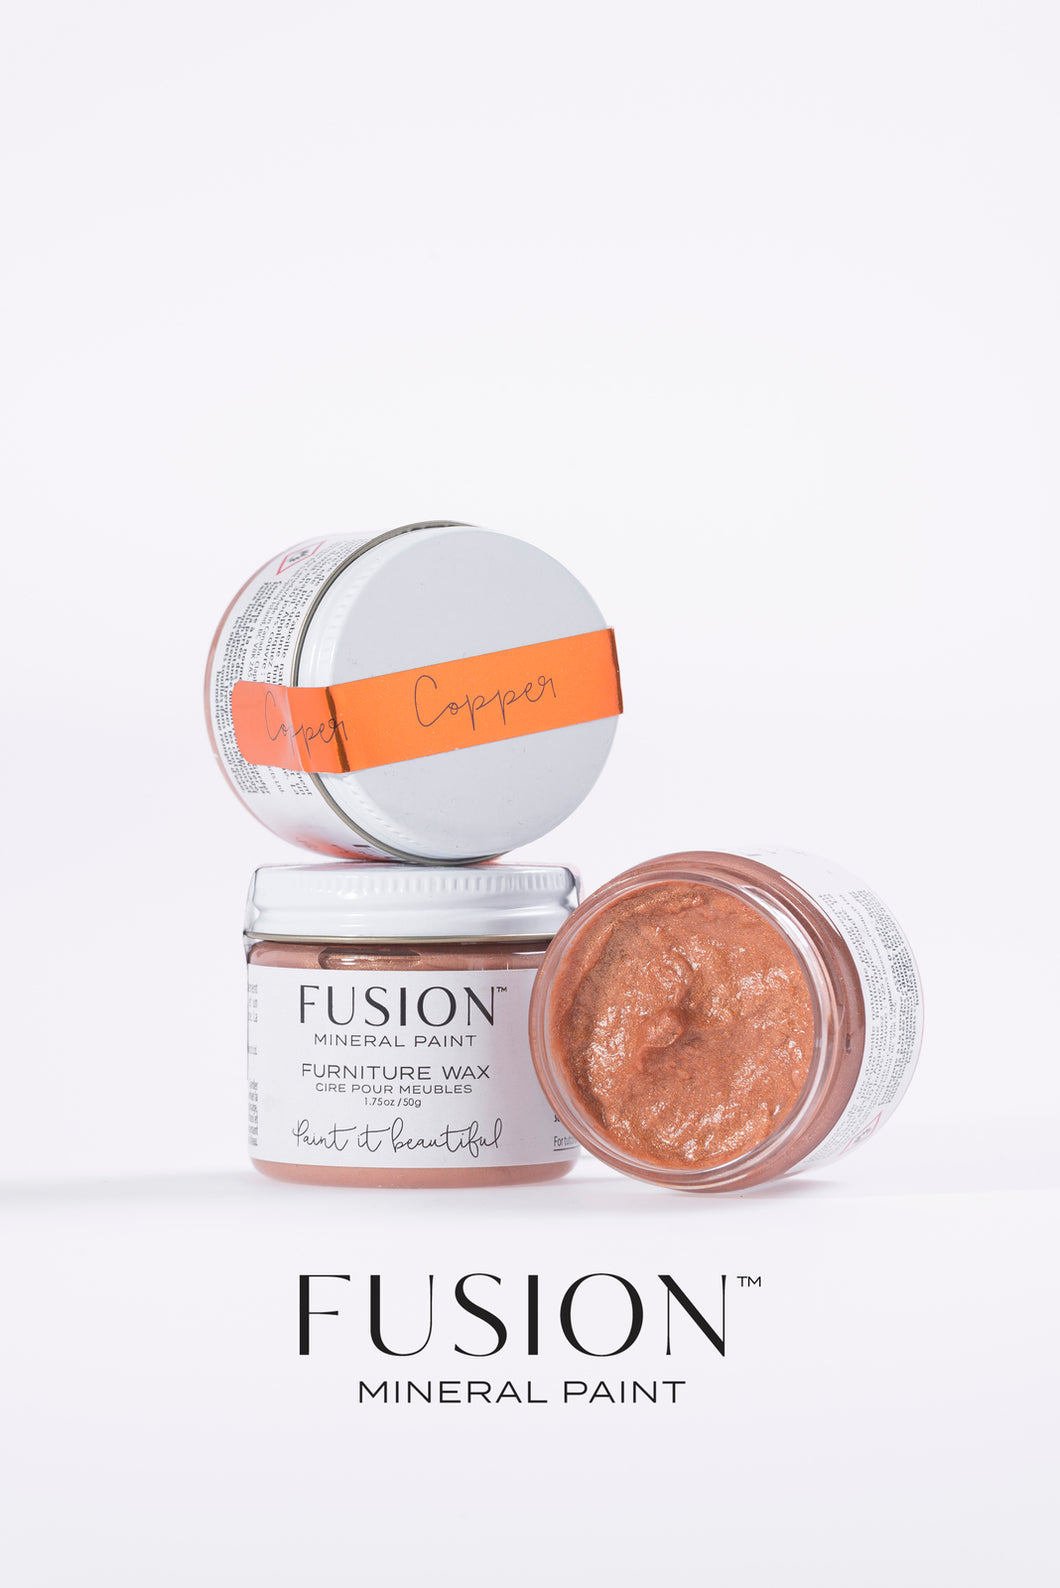 FUSION™ Mineral Paint Furniture Wax COPPER - 20% OFF AT CHECKOUT